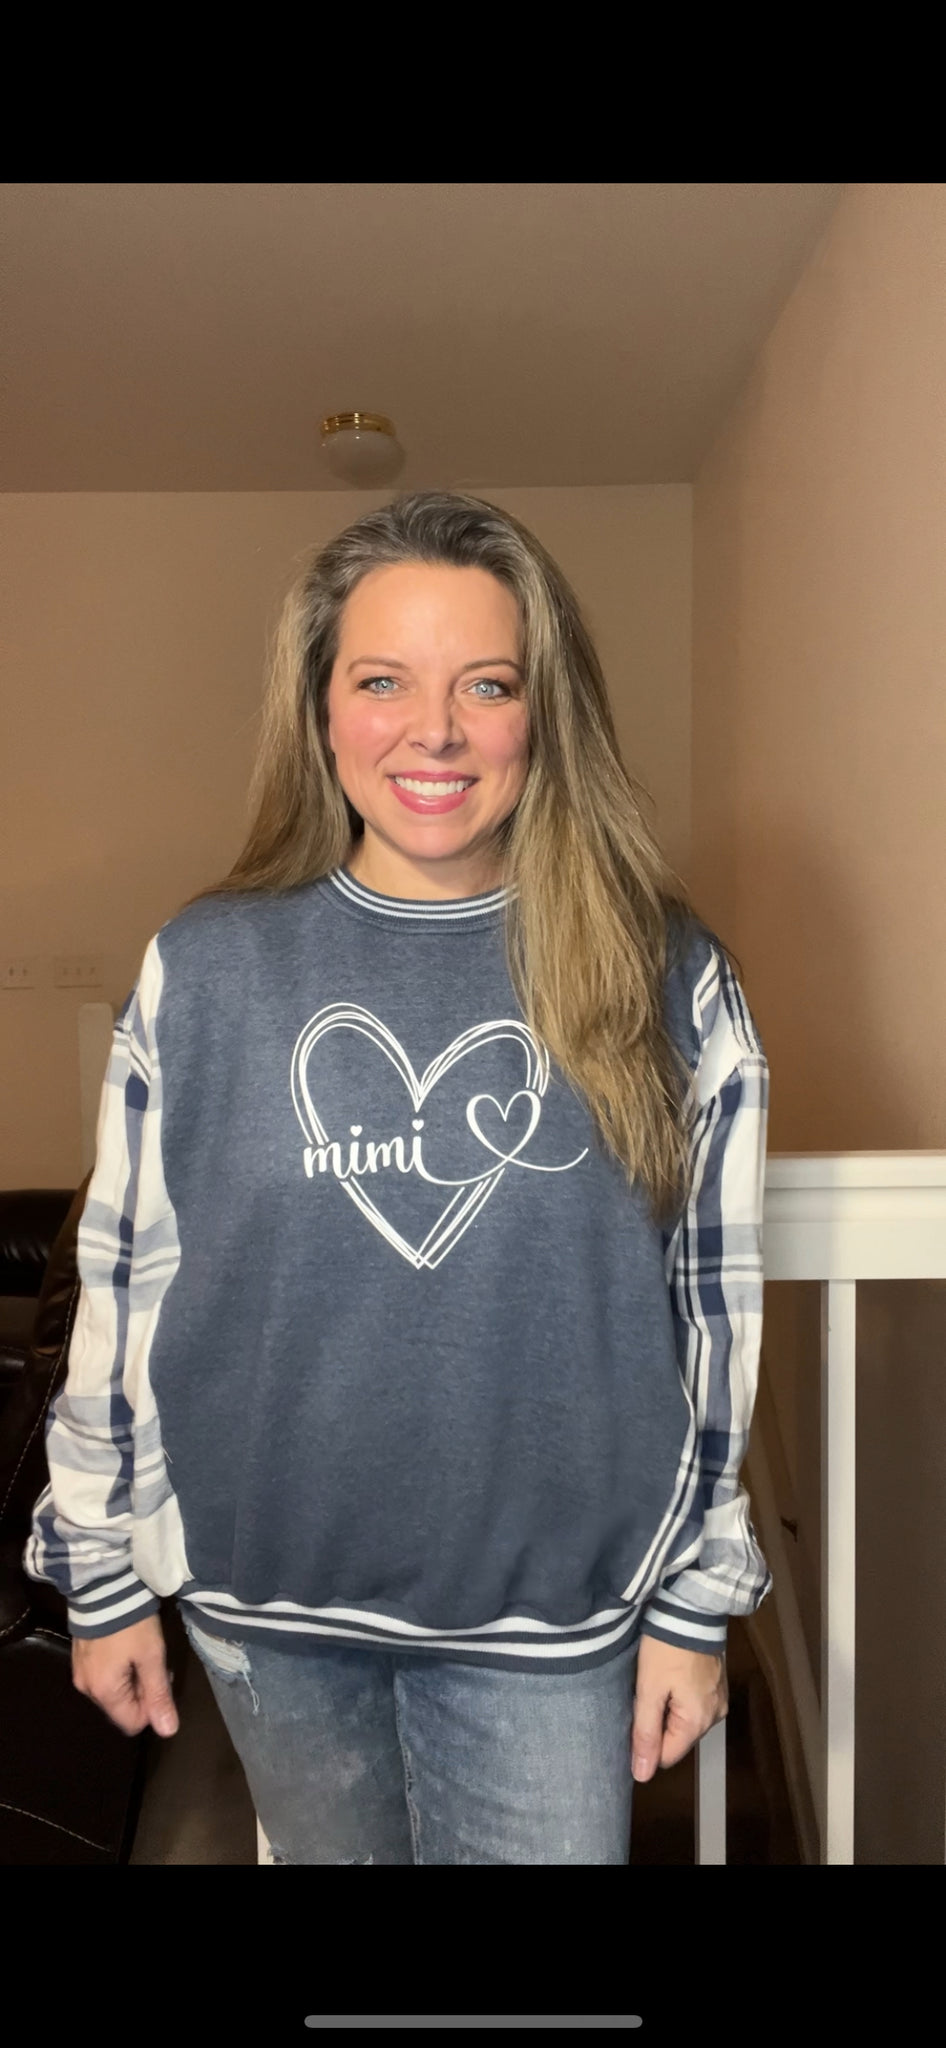 Upcycled MiMi - woman’s M/L – midweight sweatshirt with flannel sleeves ￼￼